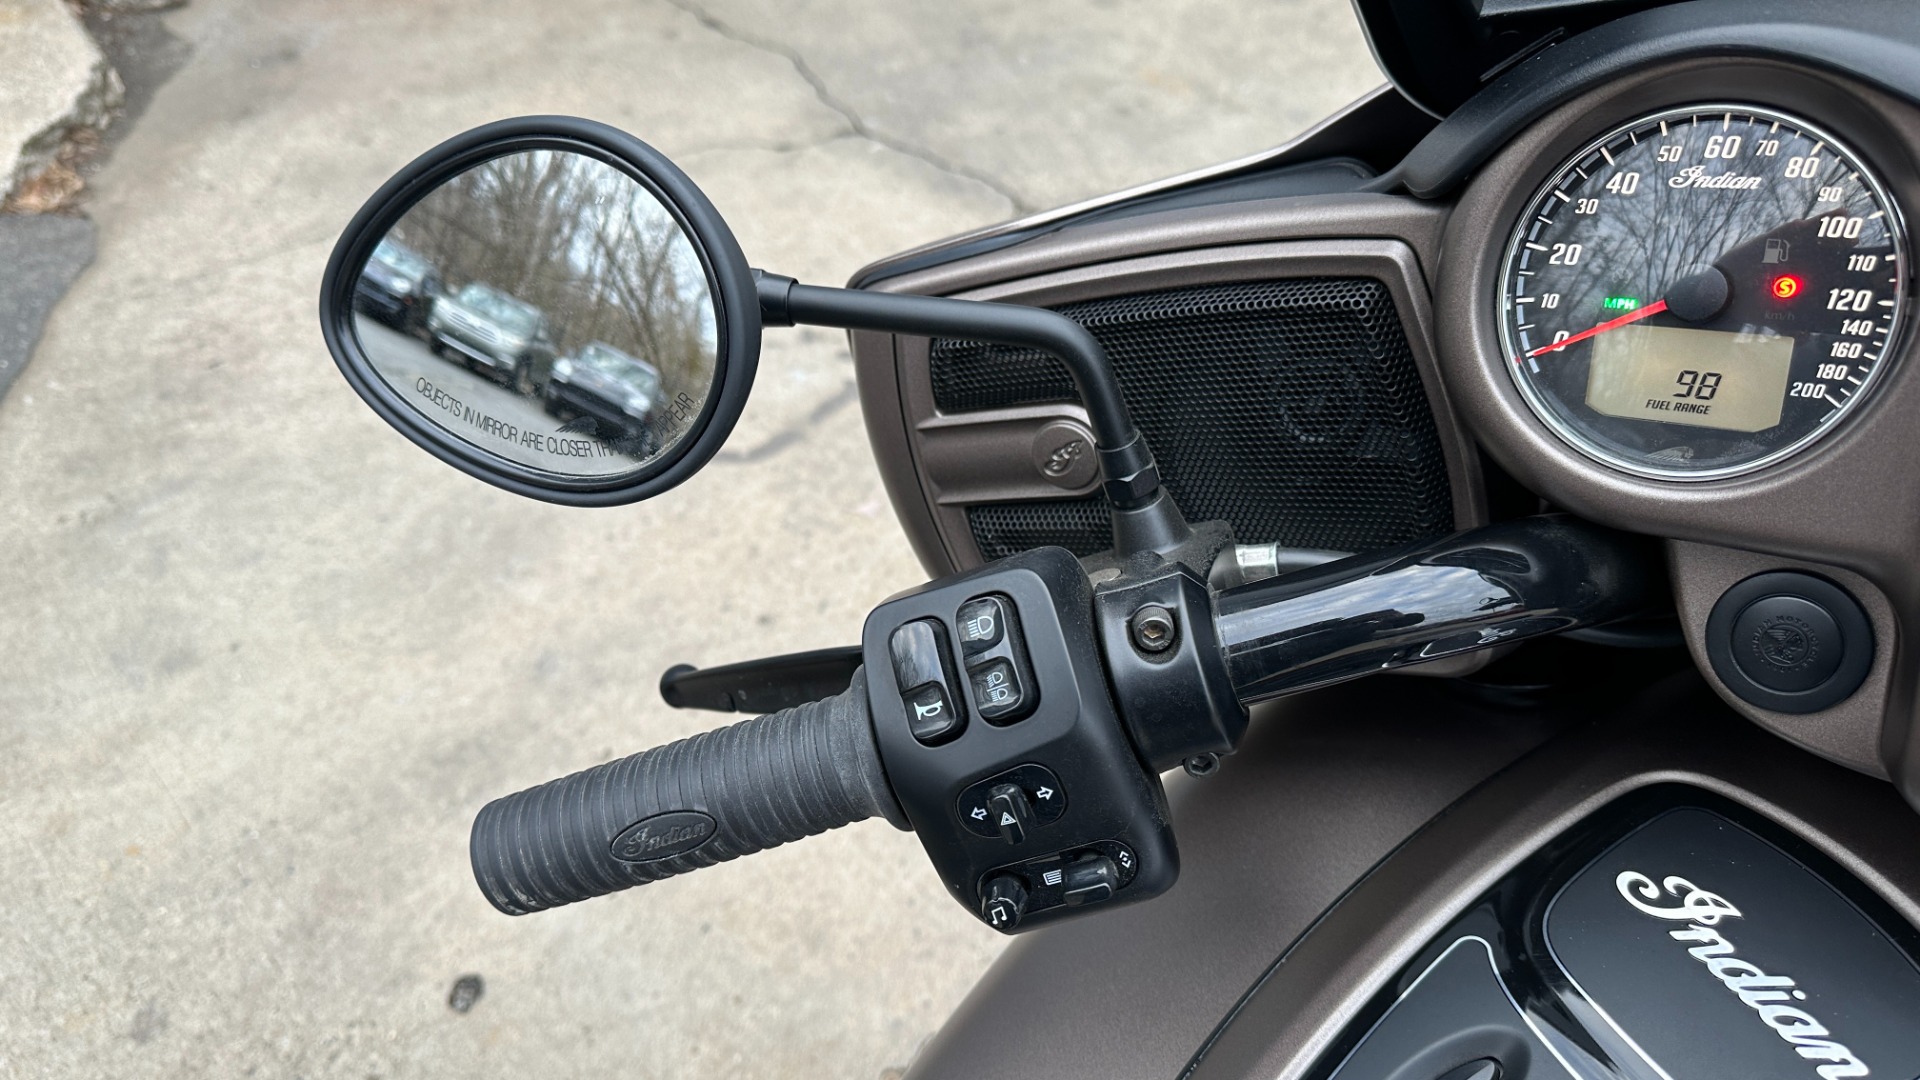 Used 2019 INDIAN CHIEFTAIN DARK HORSE / MATTE PAINT / LOW MILES / NAV / CRUISE CONTROL / TOUCHSCREEN for sale $23,999 at Formula Imports in Charlotte NC 28227 18